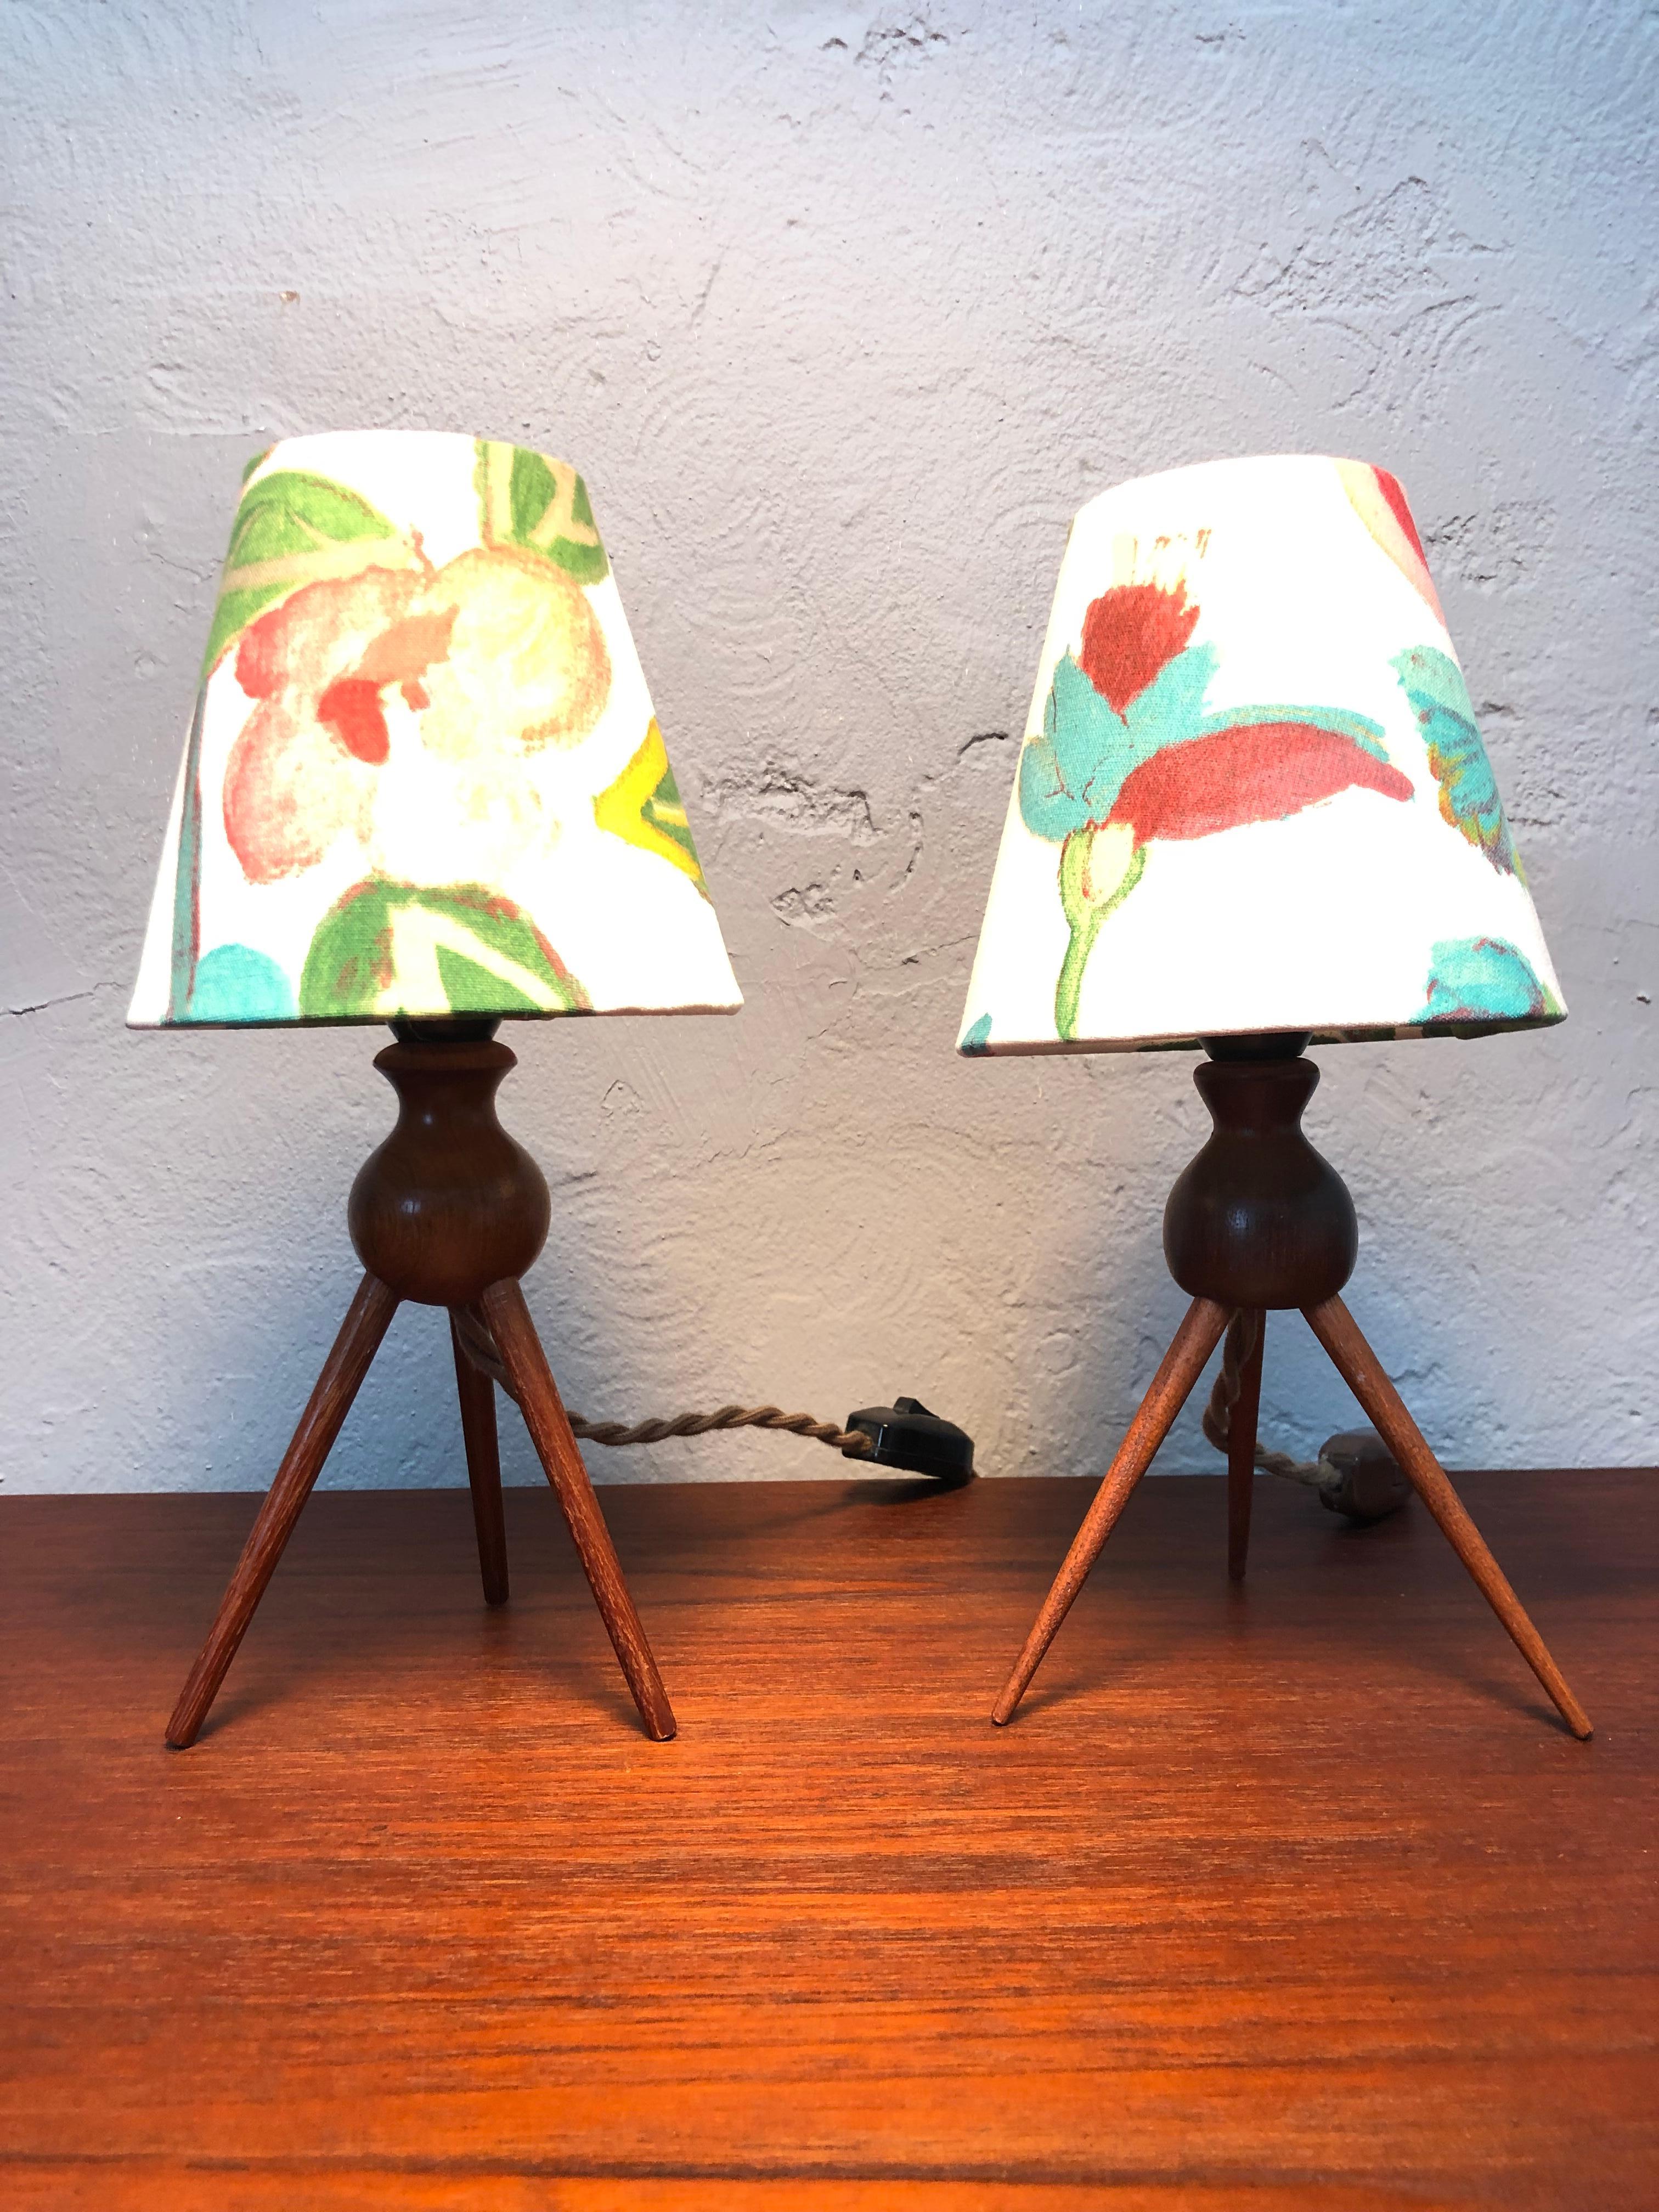 A pair of vintage Danish midcentury teak 3-legged table lamps.
Solid teak turned legs and body.
Can be fitted with a US or EU plug.
Great as bedside table lamps.
Shades not included 